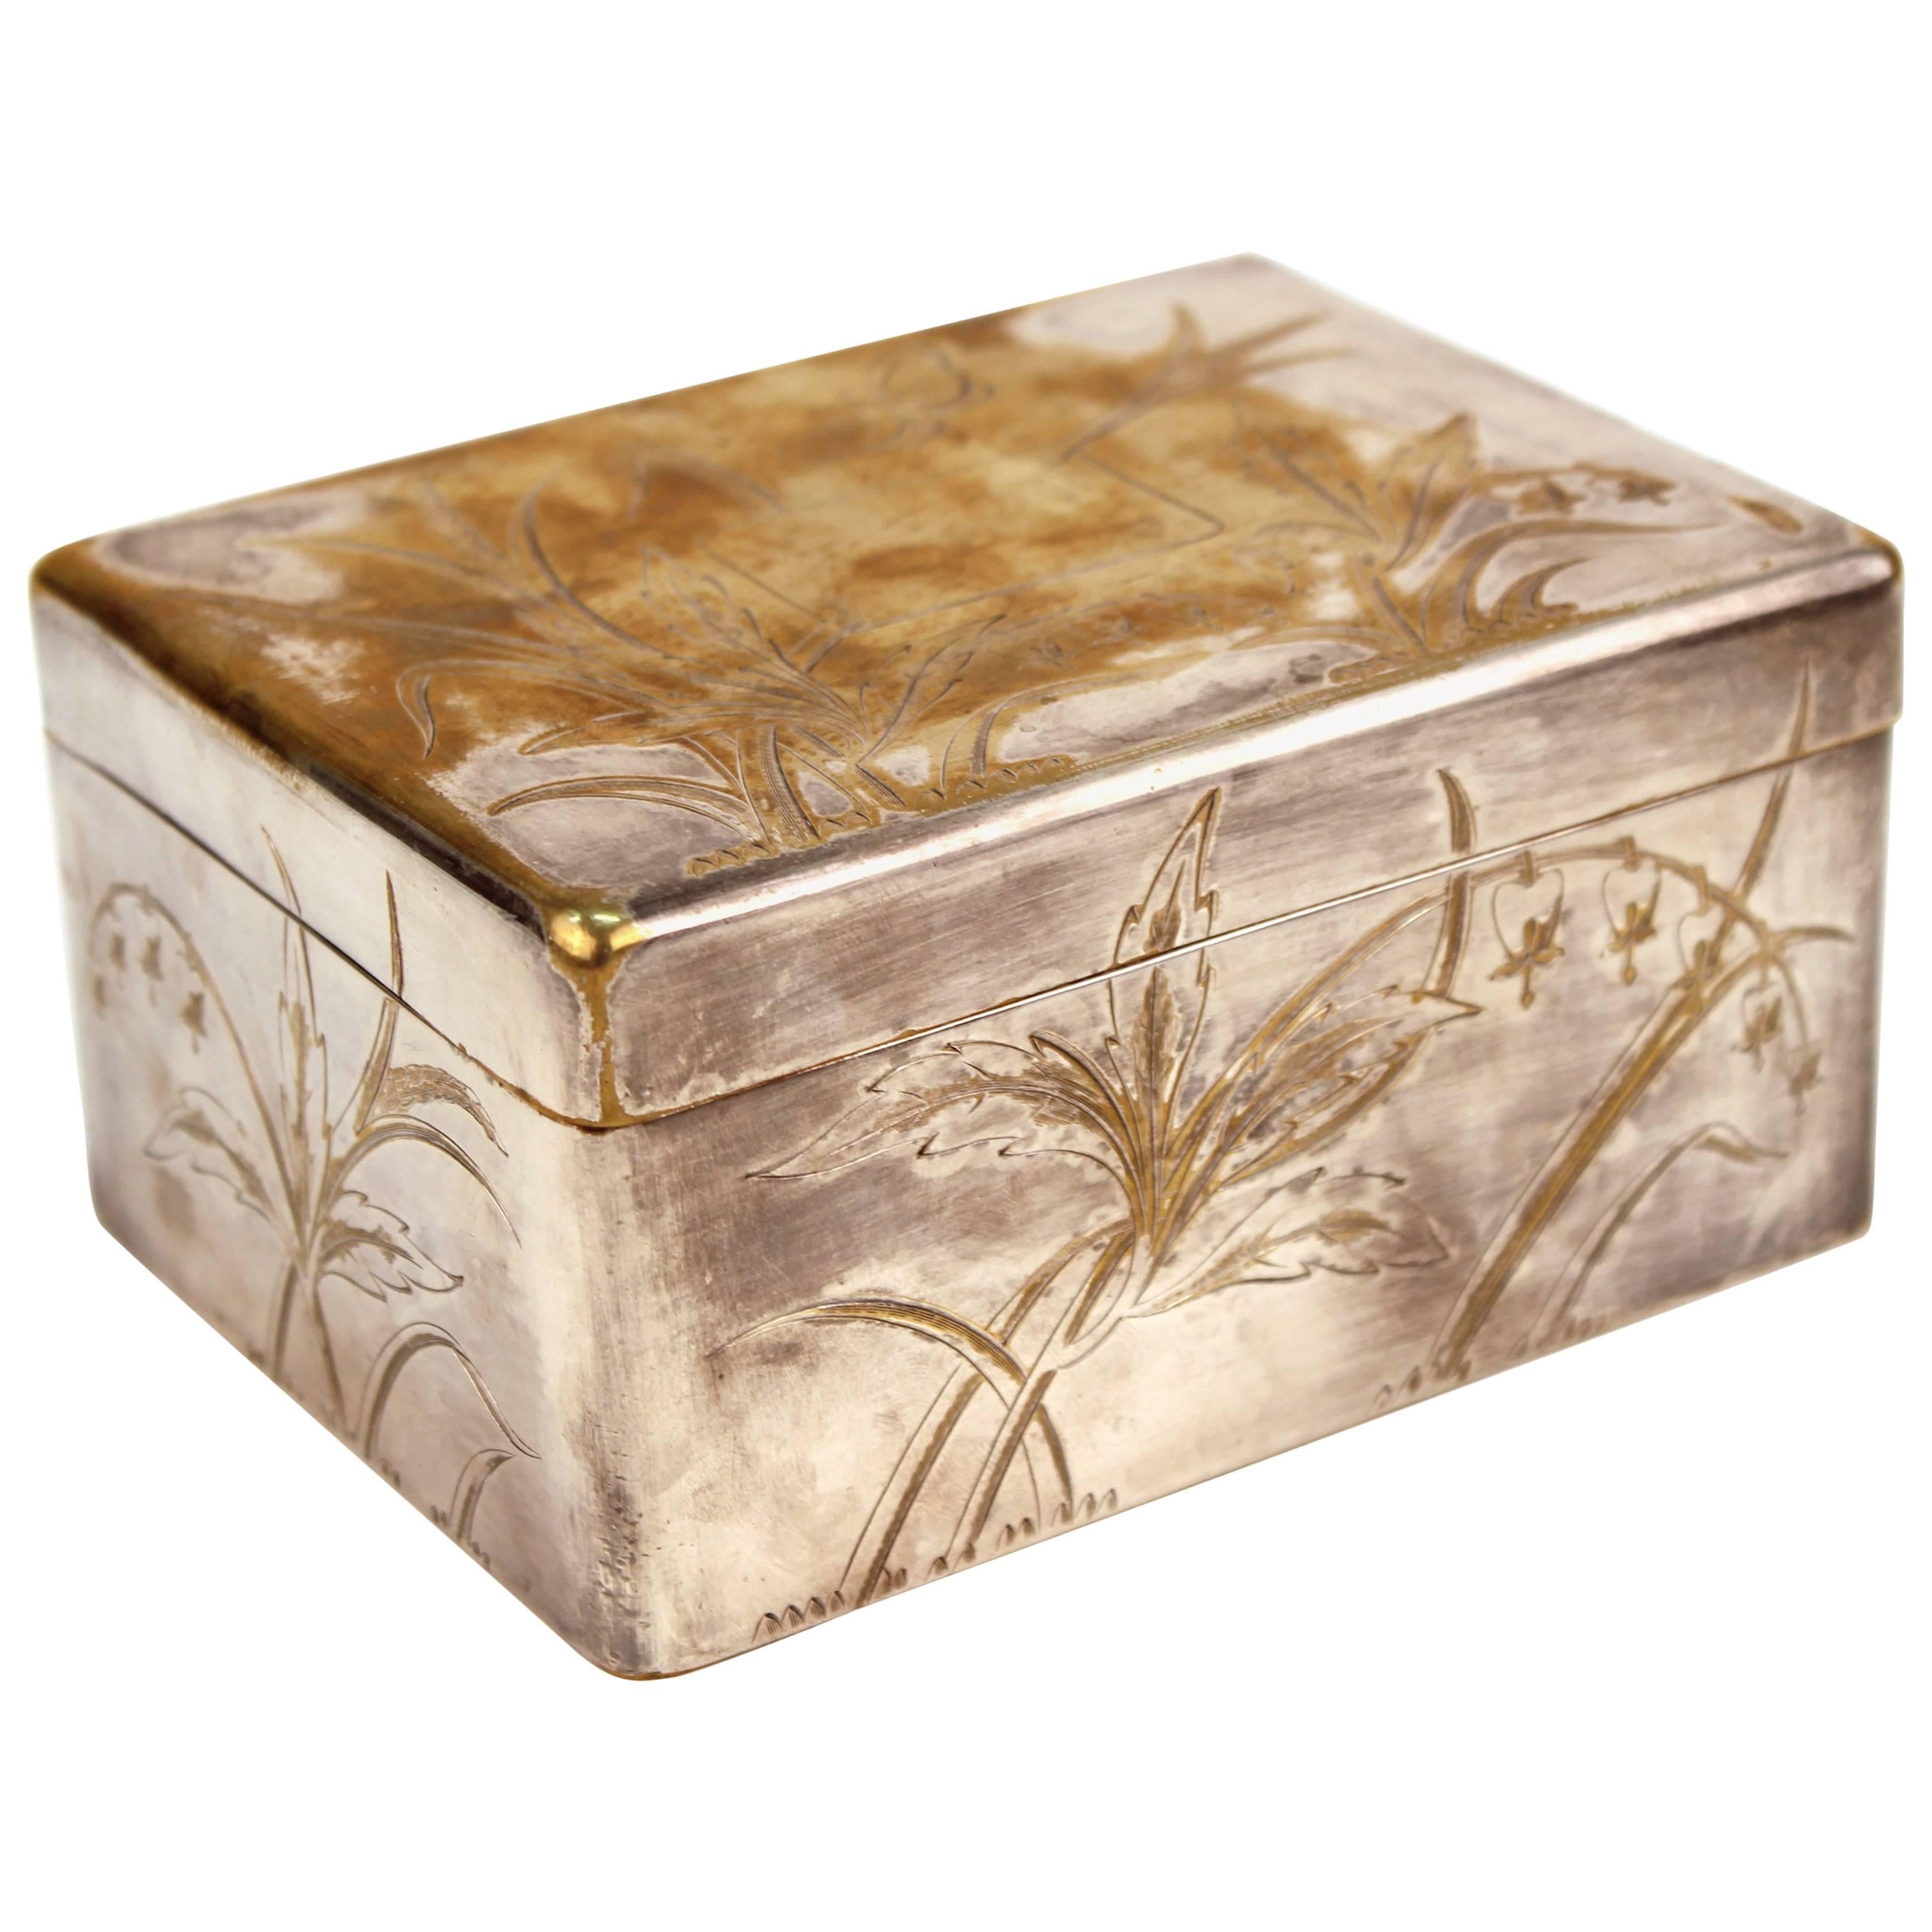 Christofle Silver Plated and Incised Trinket Box